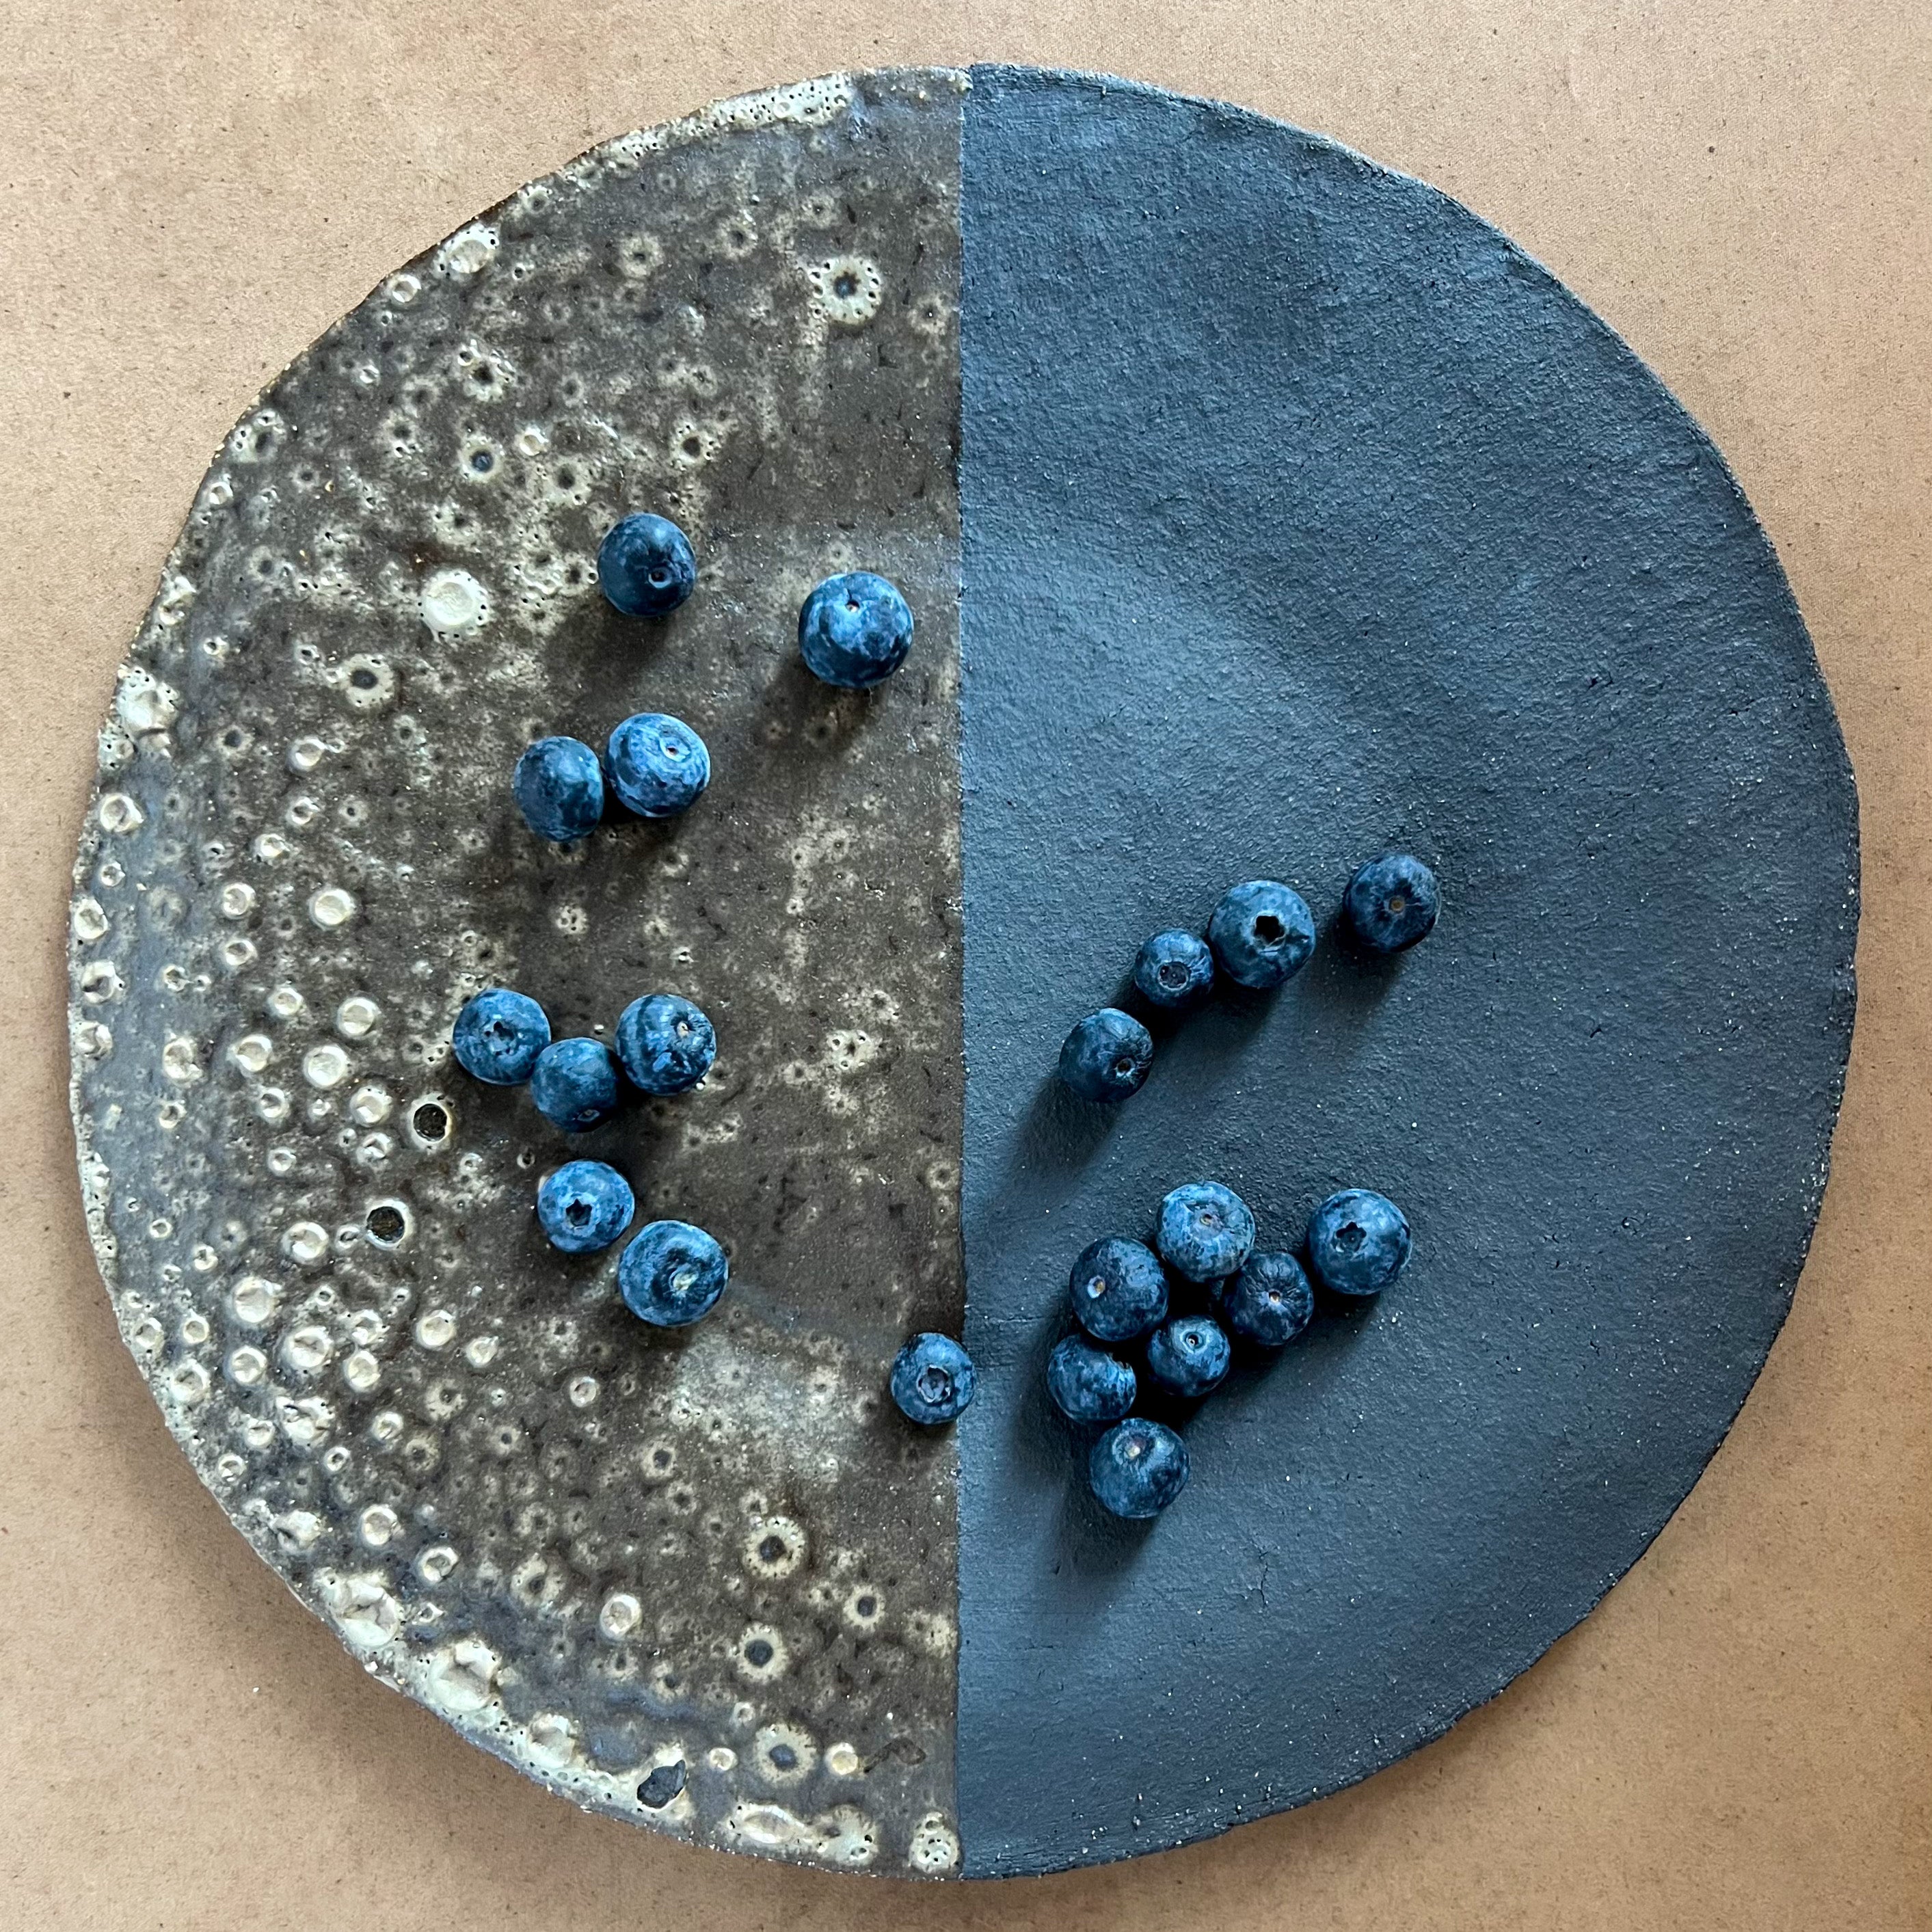 handmade one of a kind plate with unique texture and glaze from Chile